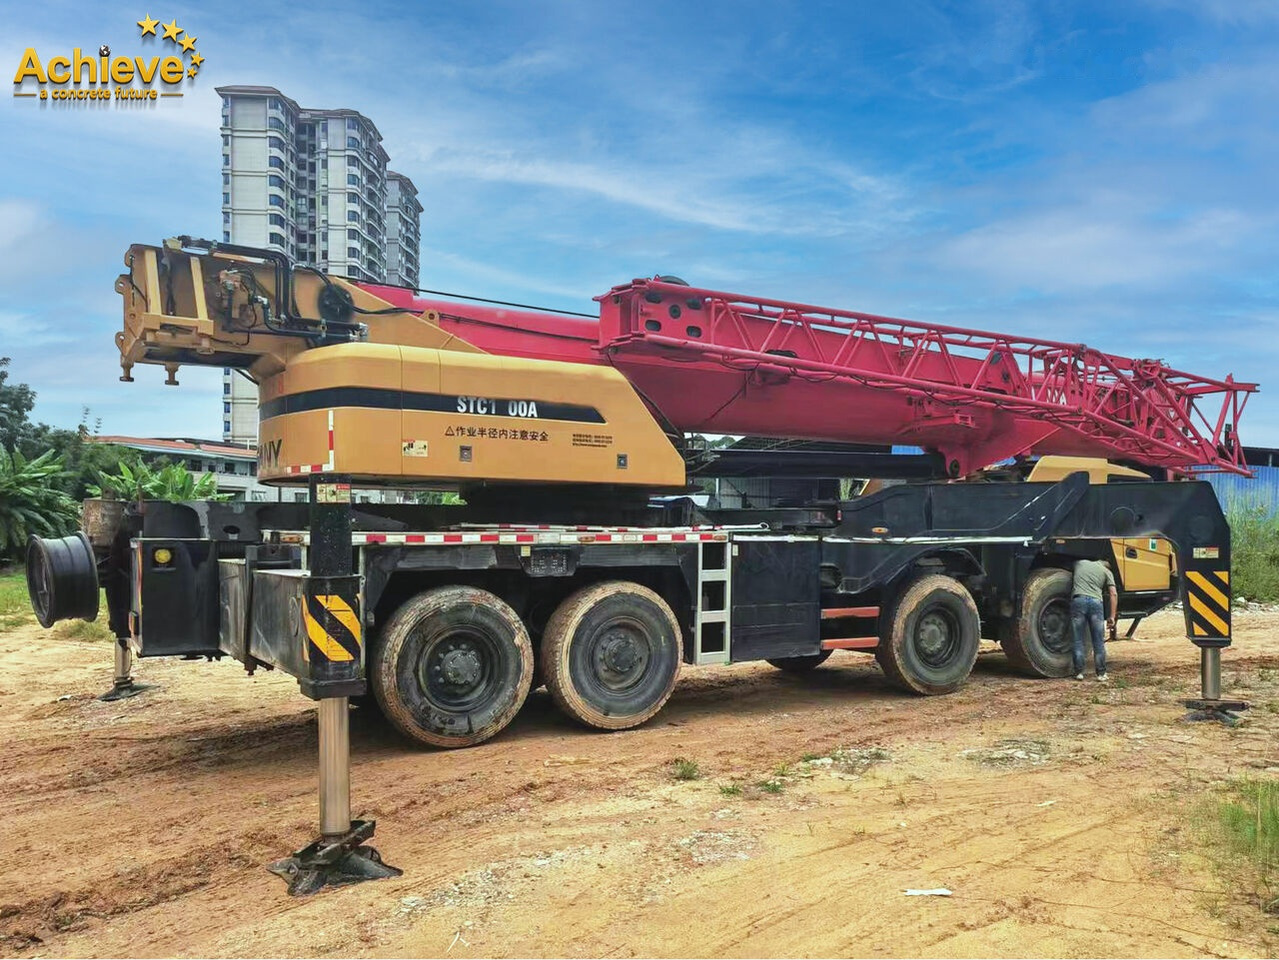 Grue mobile Sany Achieve Sany 56M 275 kW Mobile crane For Sale Most Popular 100: photos 3